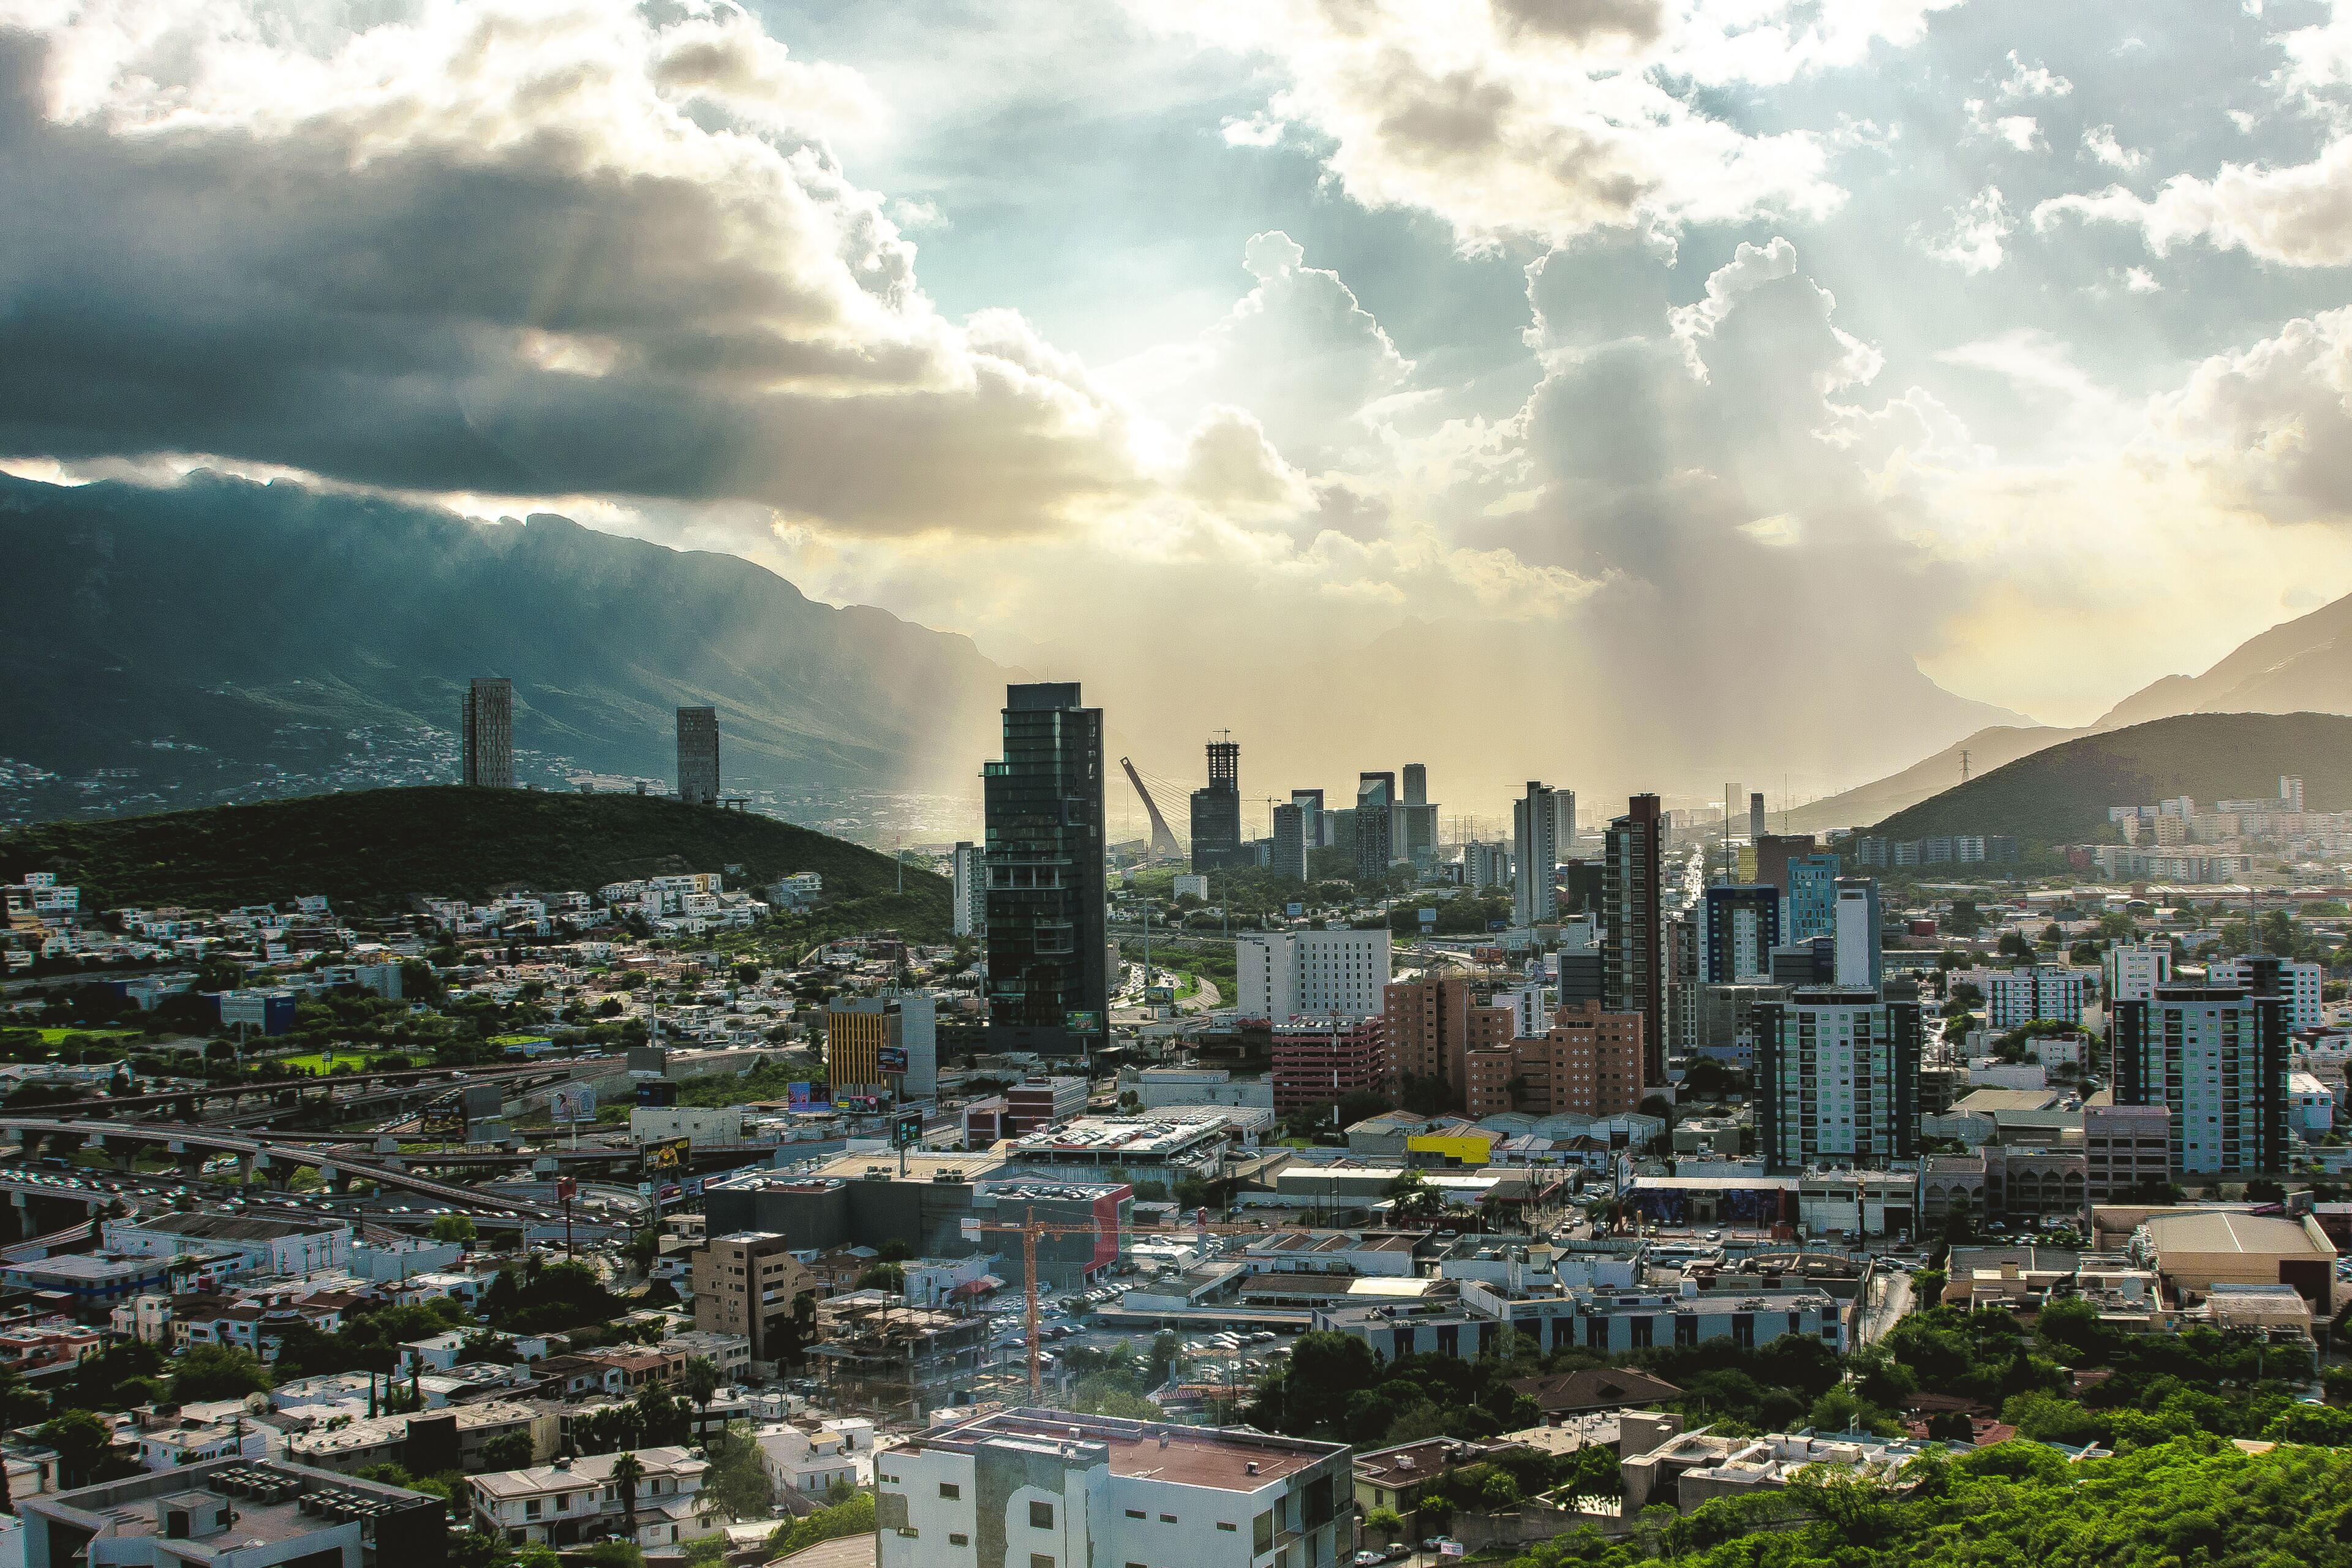 Panoramic view of the city of Monterrey with a view of the mountains and the cloudy sky letting in the sun's rays.